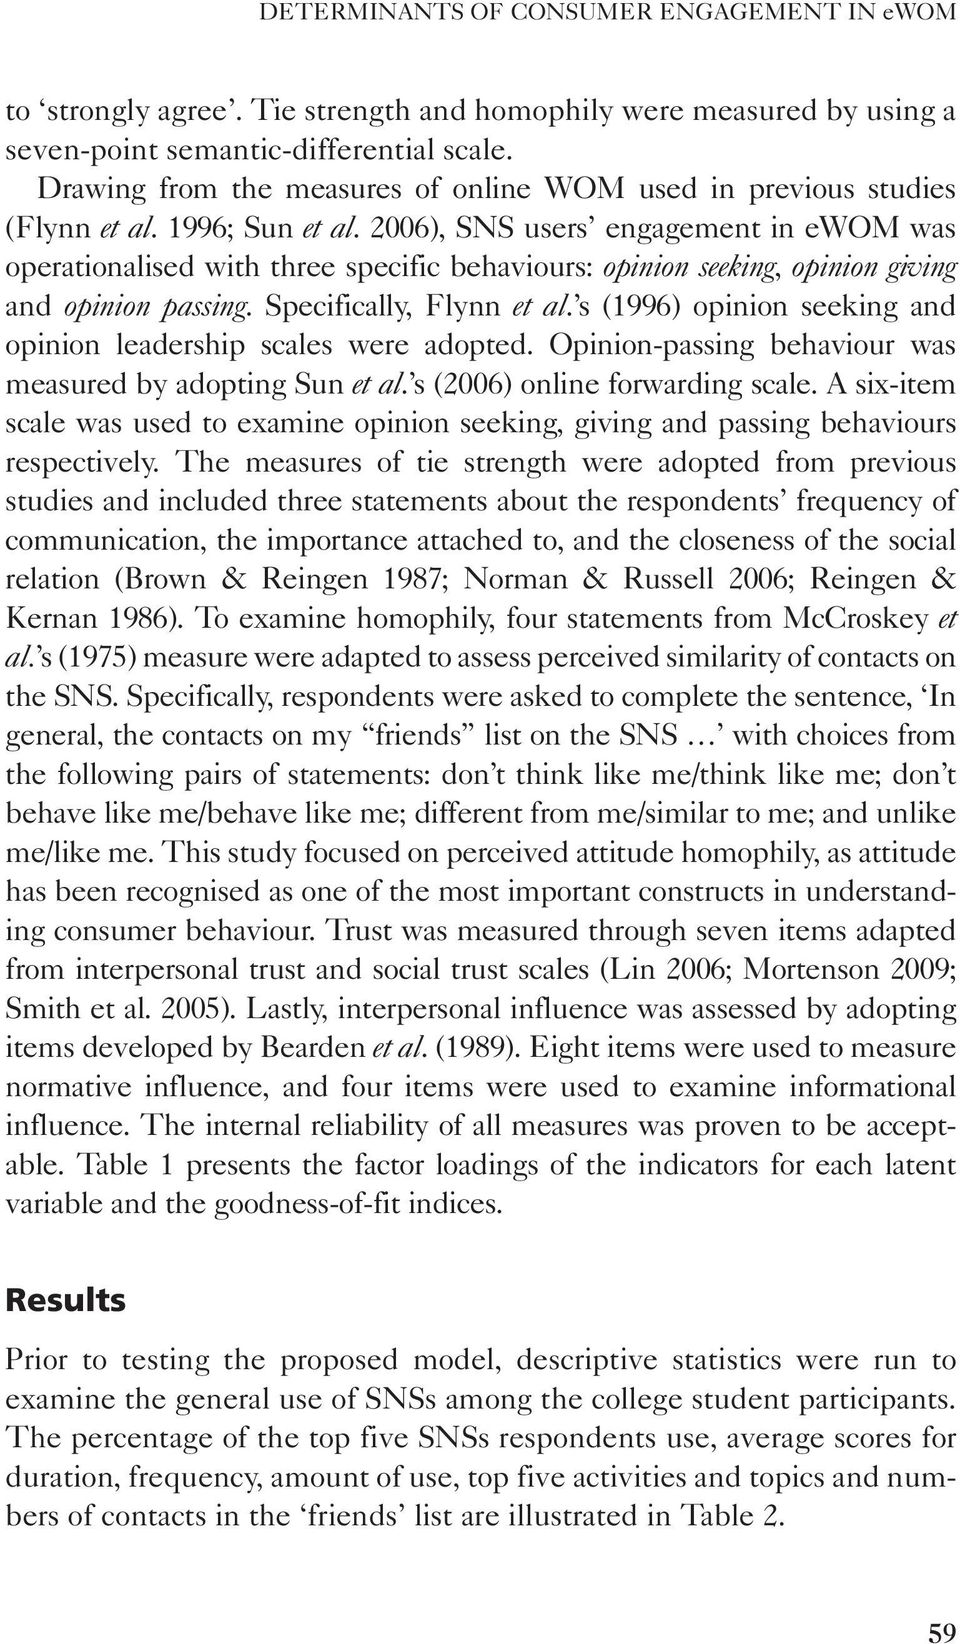 2006), SNS users engagement in ewom was operationalised with three specific behaviours: opinion seeking, opinion giving and opinion passing. Specifically, Flynn et al.